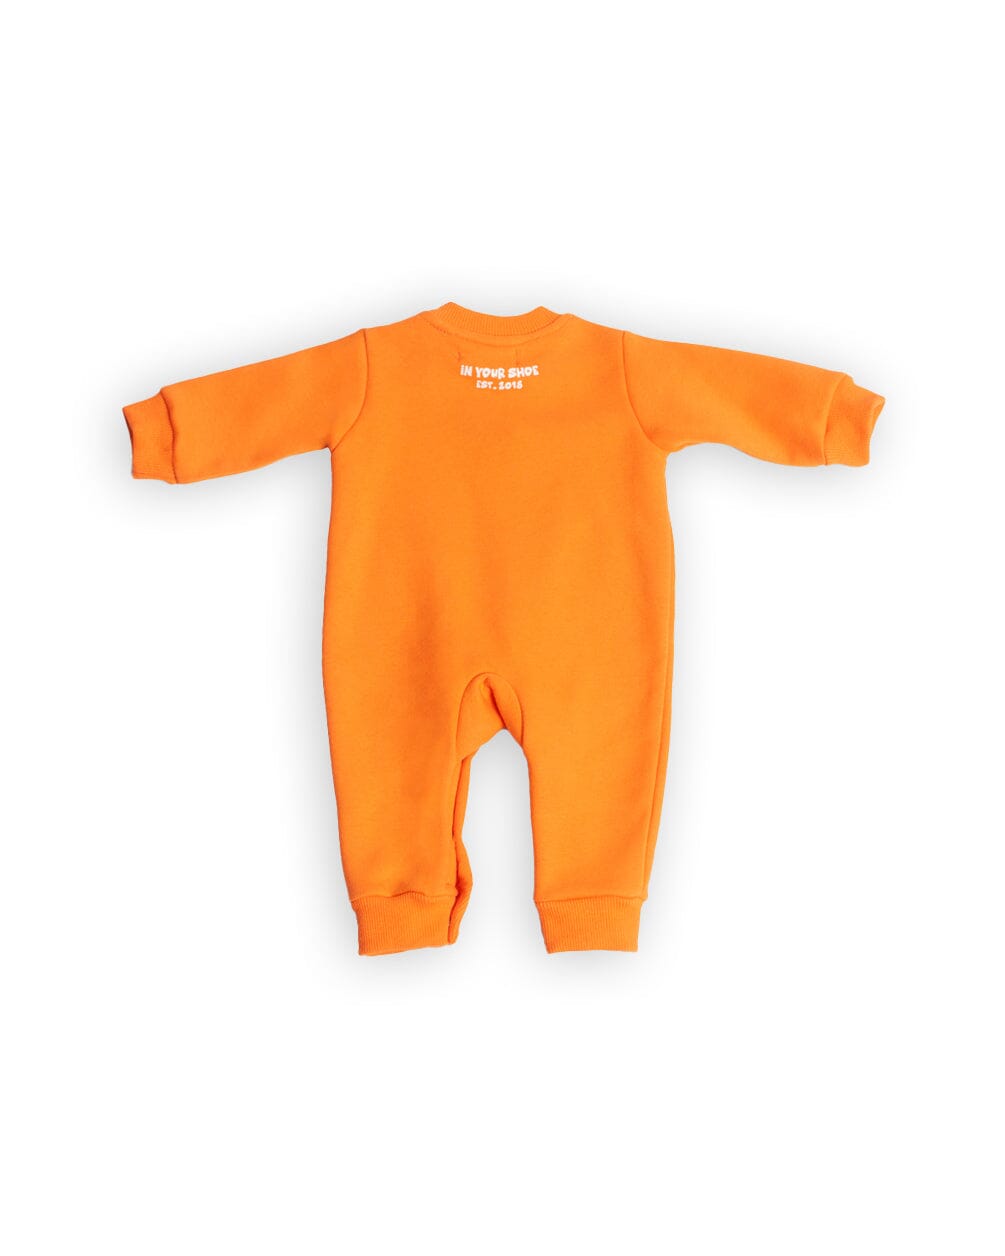 Out Of Office Babysuit (Kids) Kids Onesies IN YOUR SHOE 